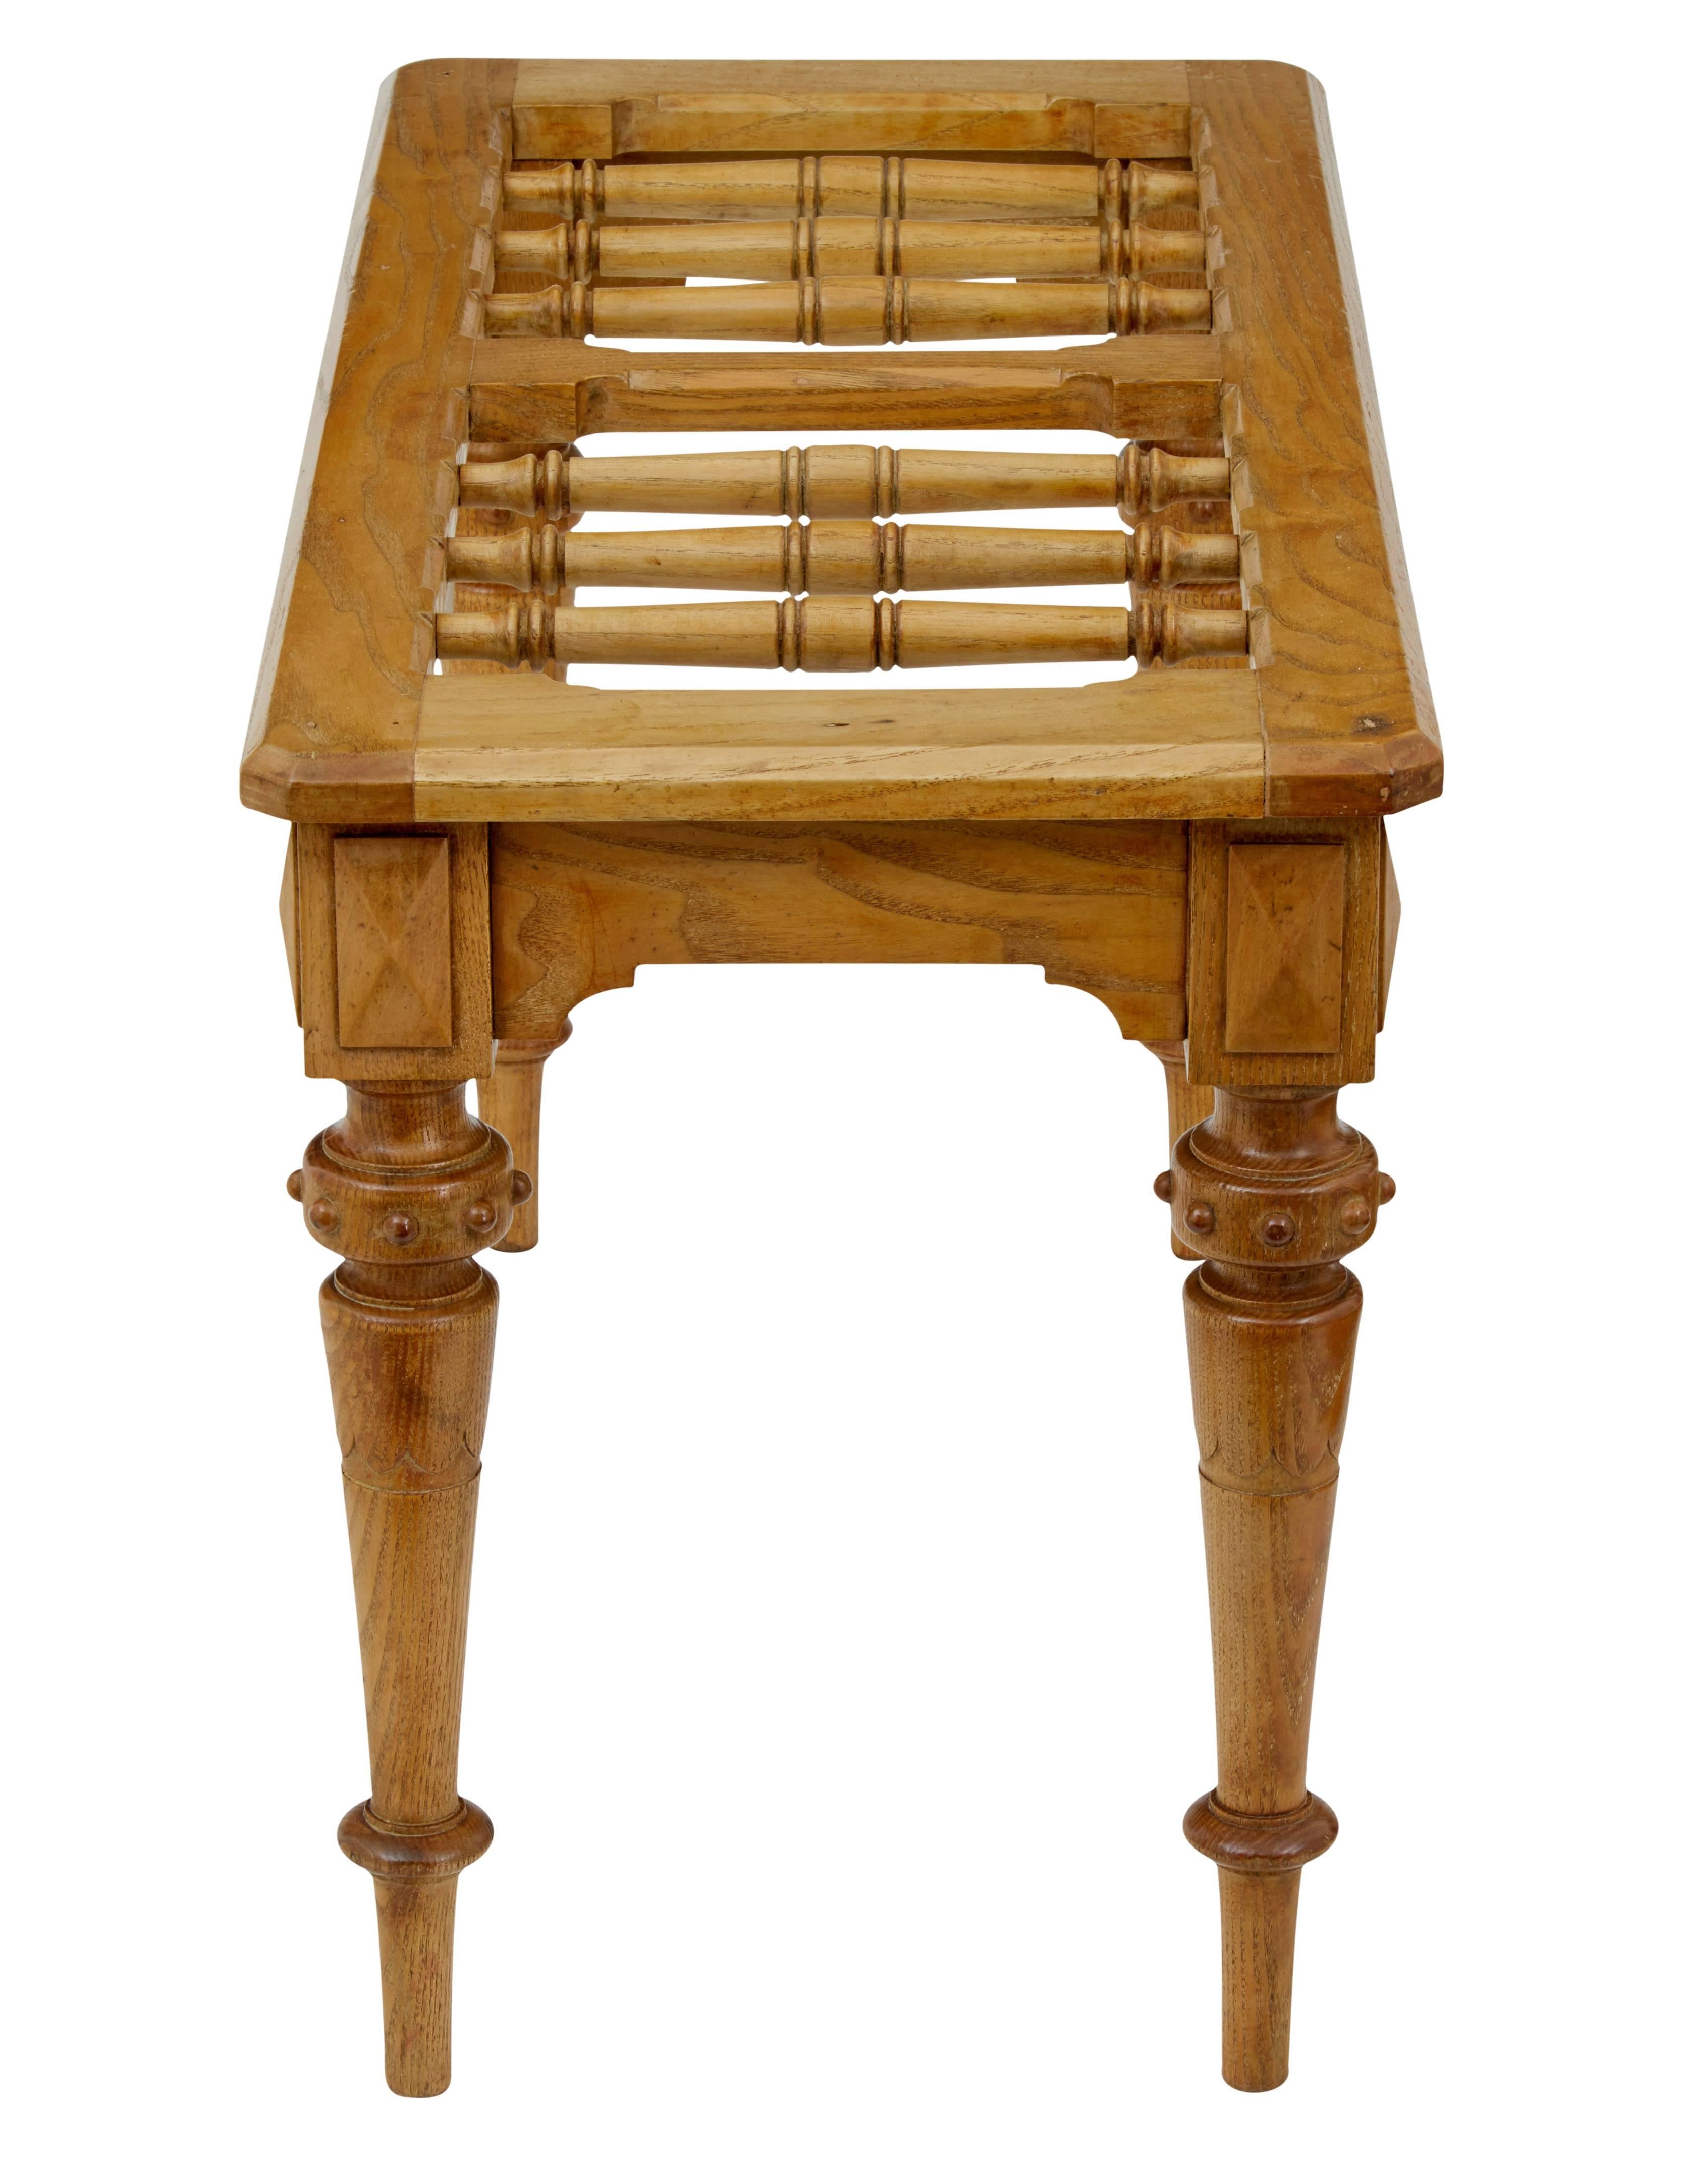 Good quality luggage rack, circa 1895.
Rich golden oak with turned spindle top, standing on four turned legs.

Measures: Height 18